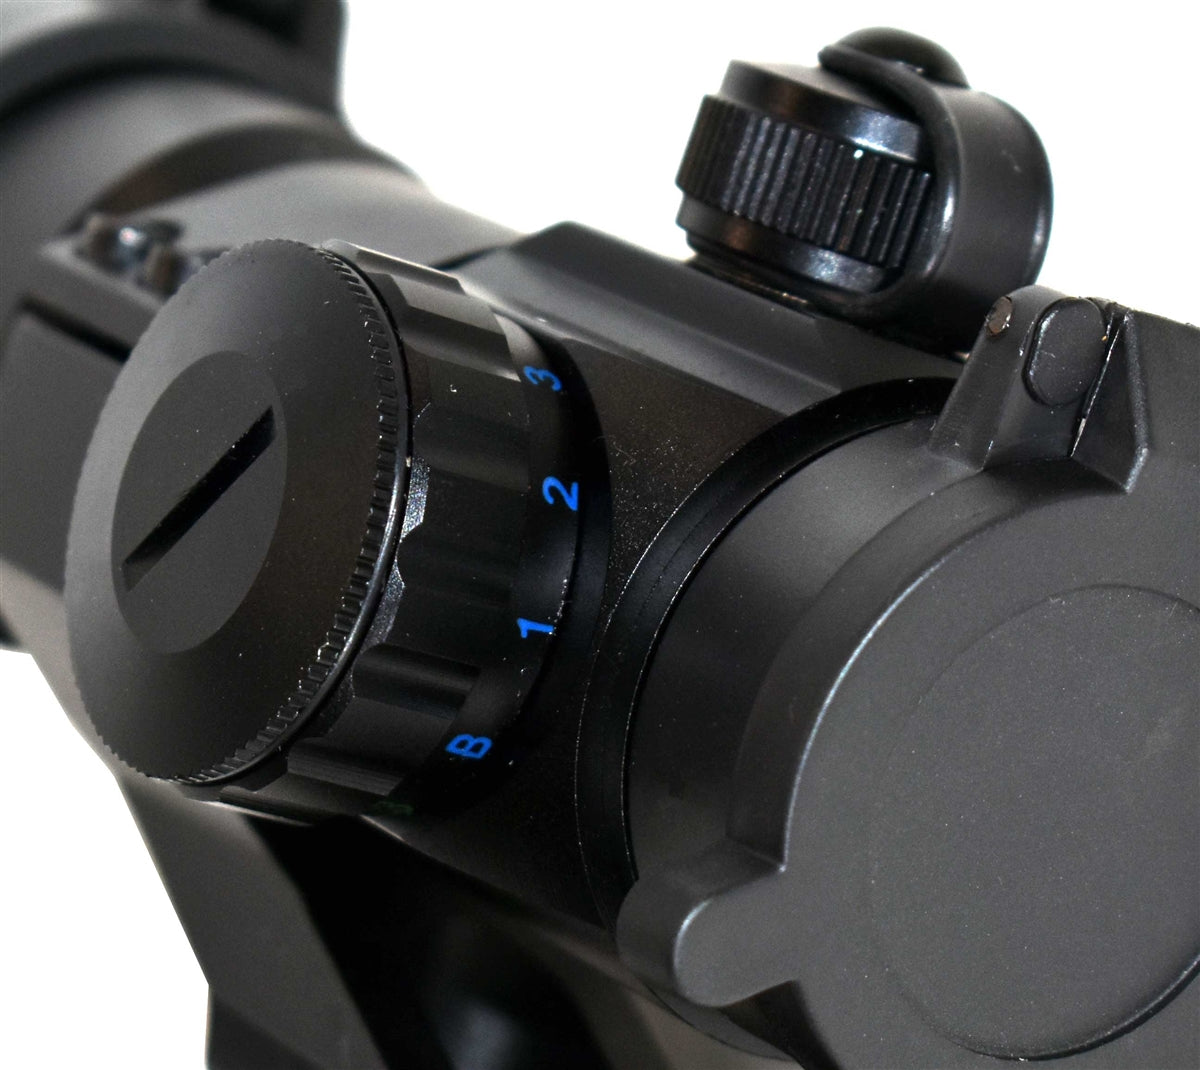 Tactical Red Green Blue Dot Sight with Trinity saddle mount for Remington 870 tac-14 12 gauge pump.